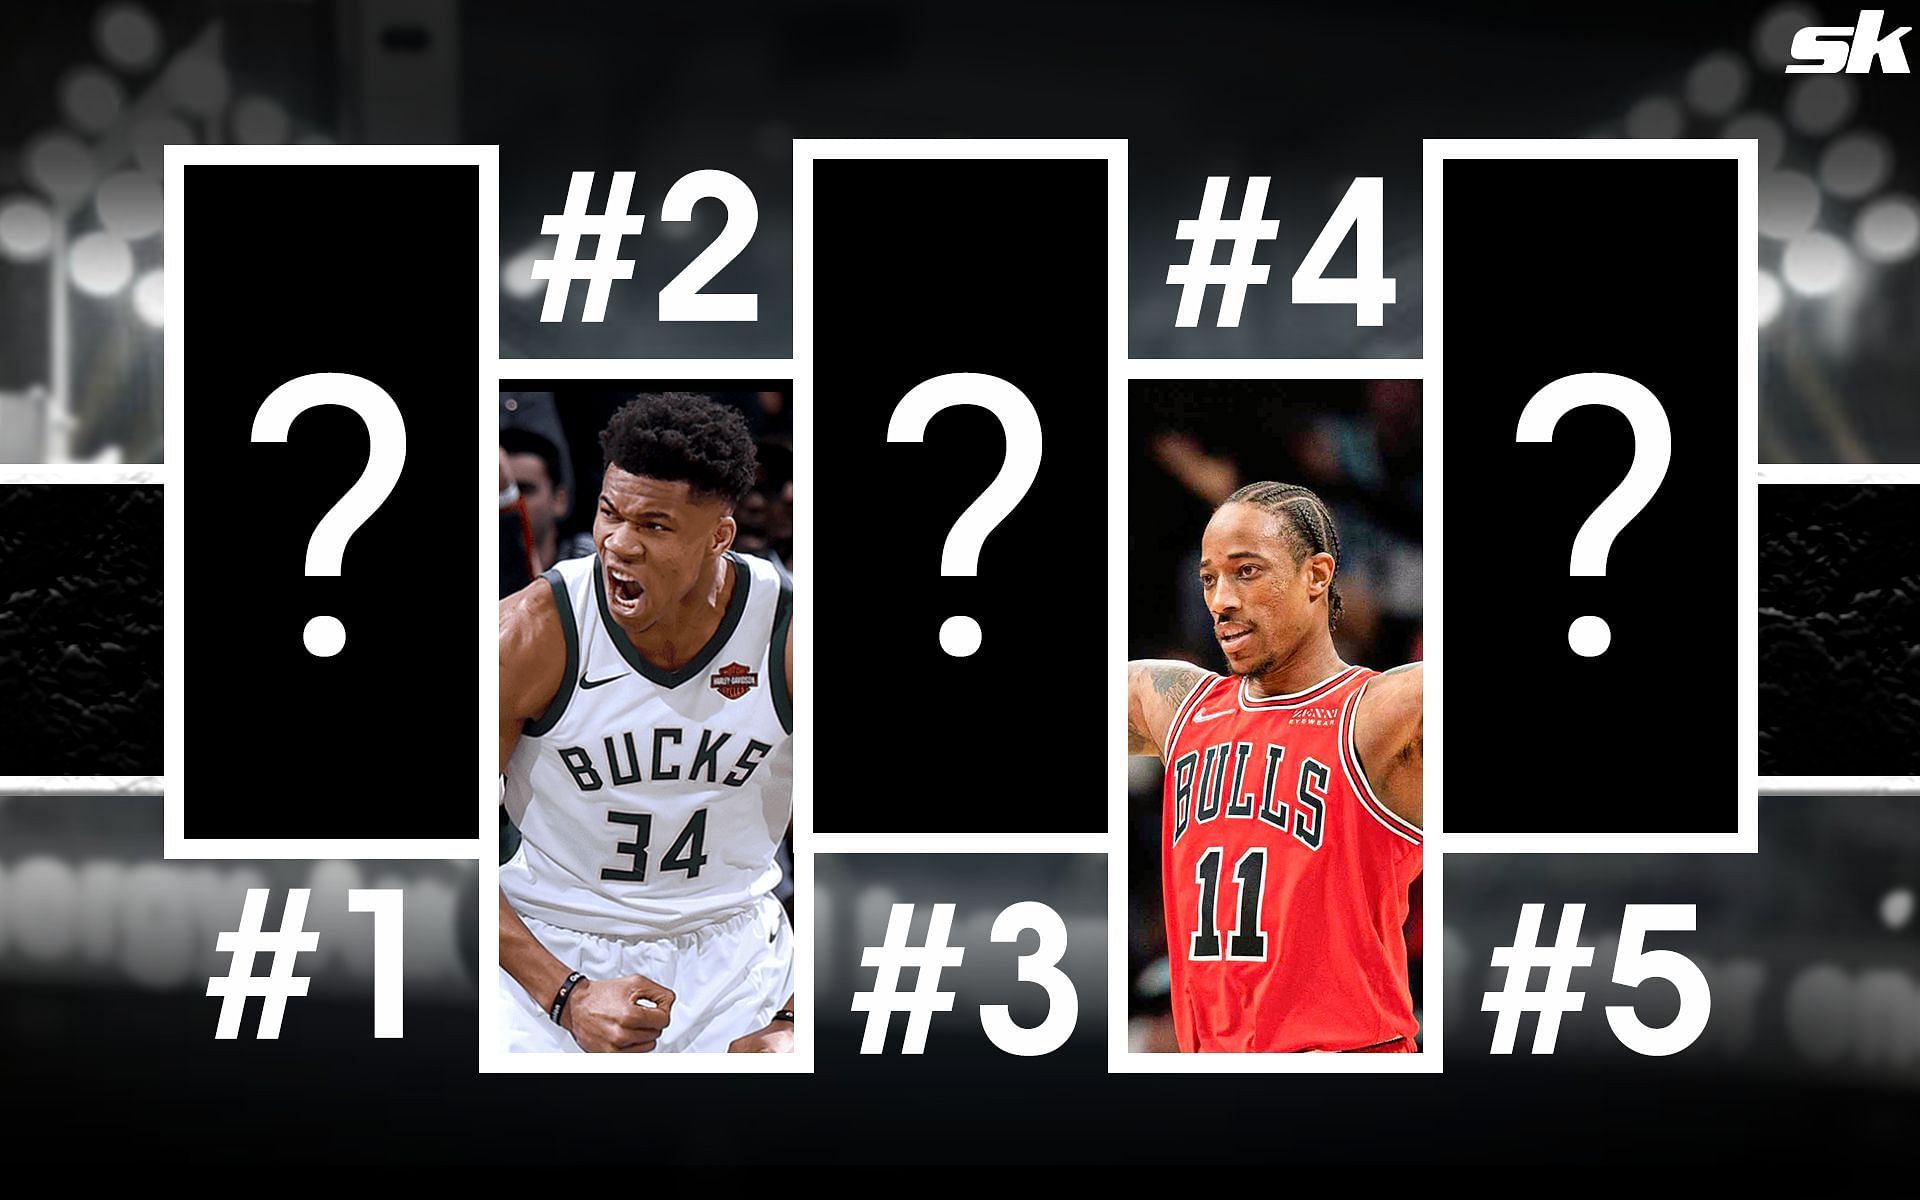 NBA Most Valuable Player (MVP) Power Rankings featuring Giannis